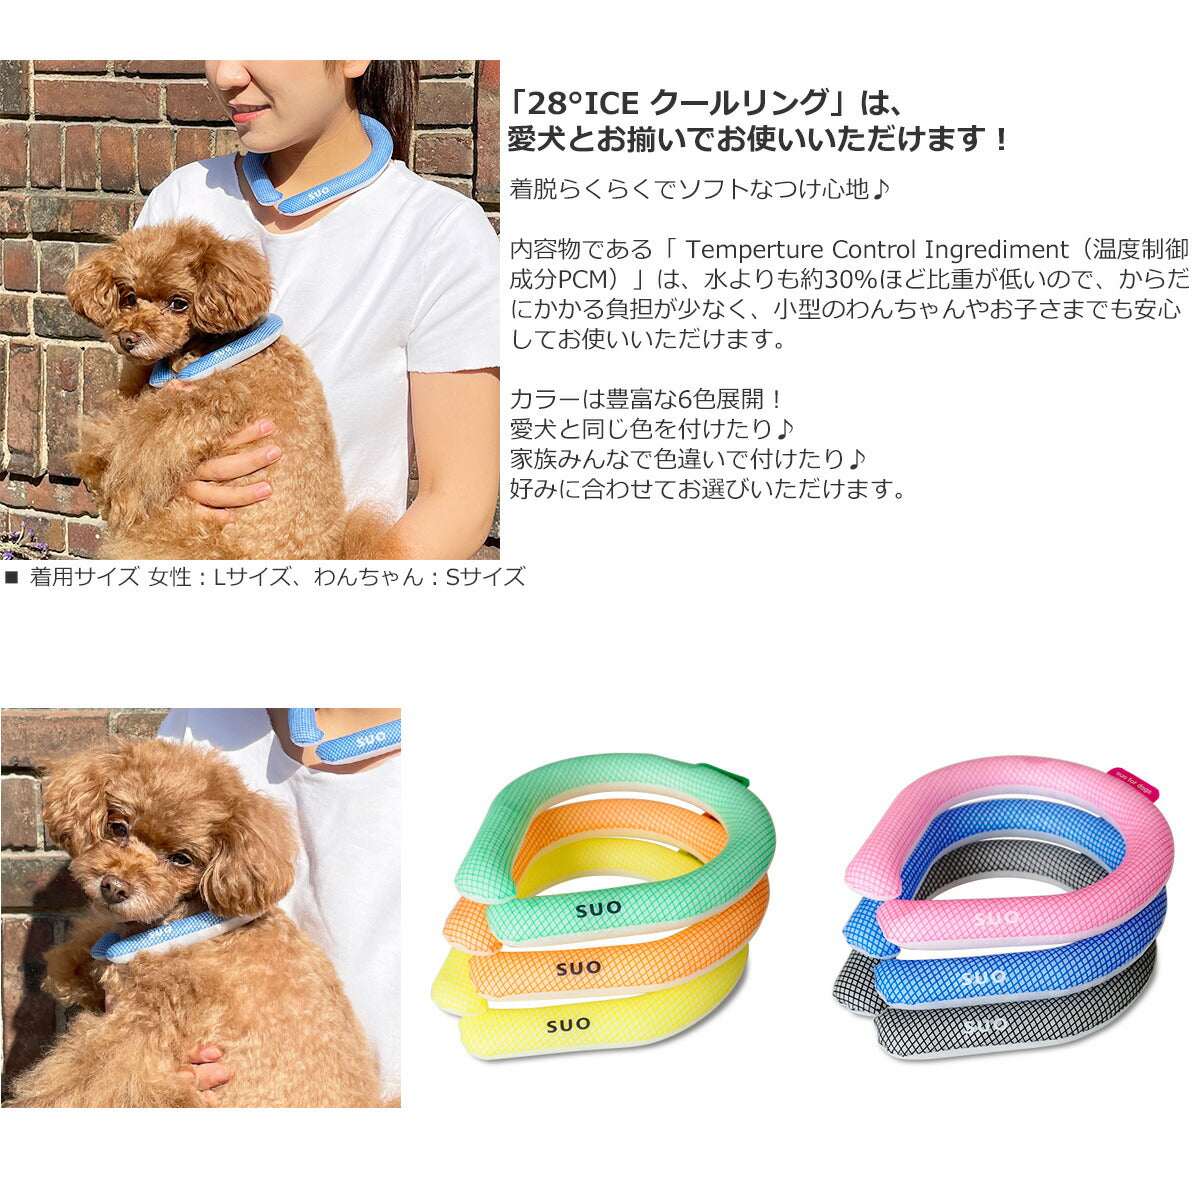 SUO for dogs 28°ICE SUOリング ボタンなし S オレンジ 熱中症対策グッズ 暑さ対策 ひんやり 首 冷感 犬 大人 子供